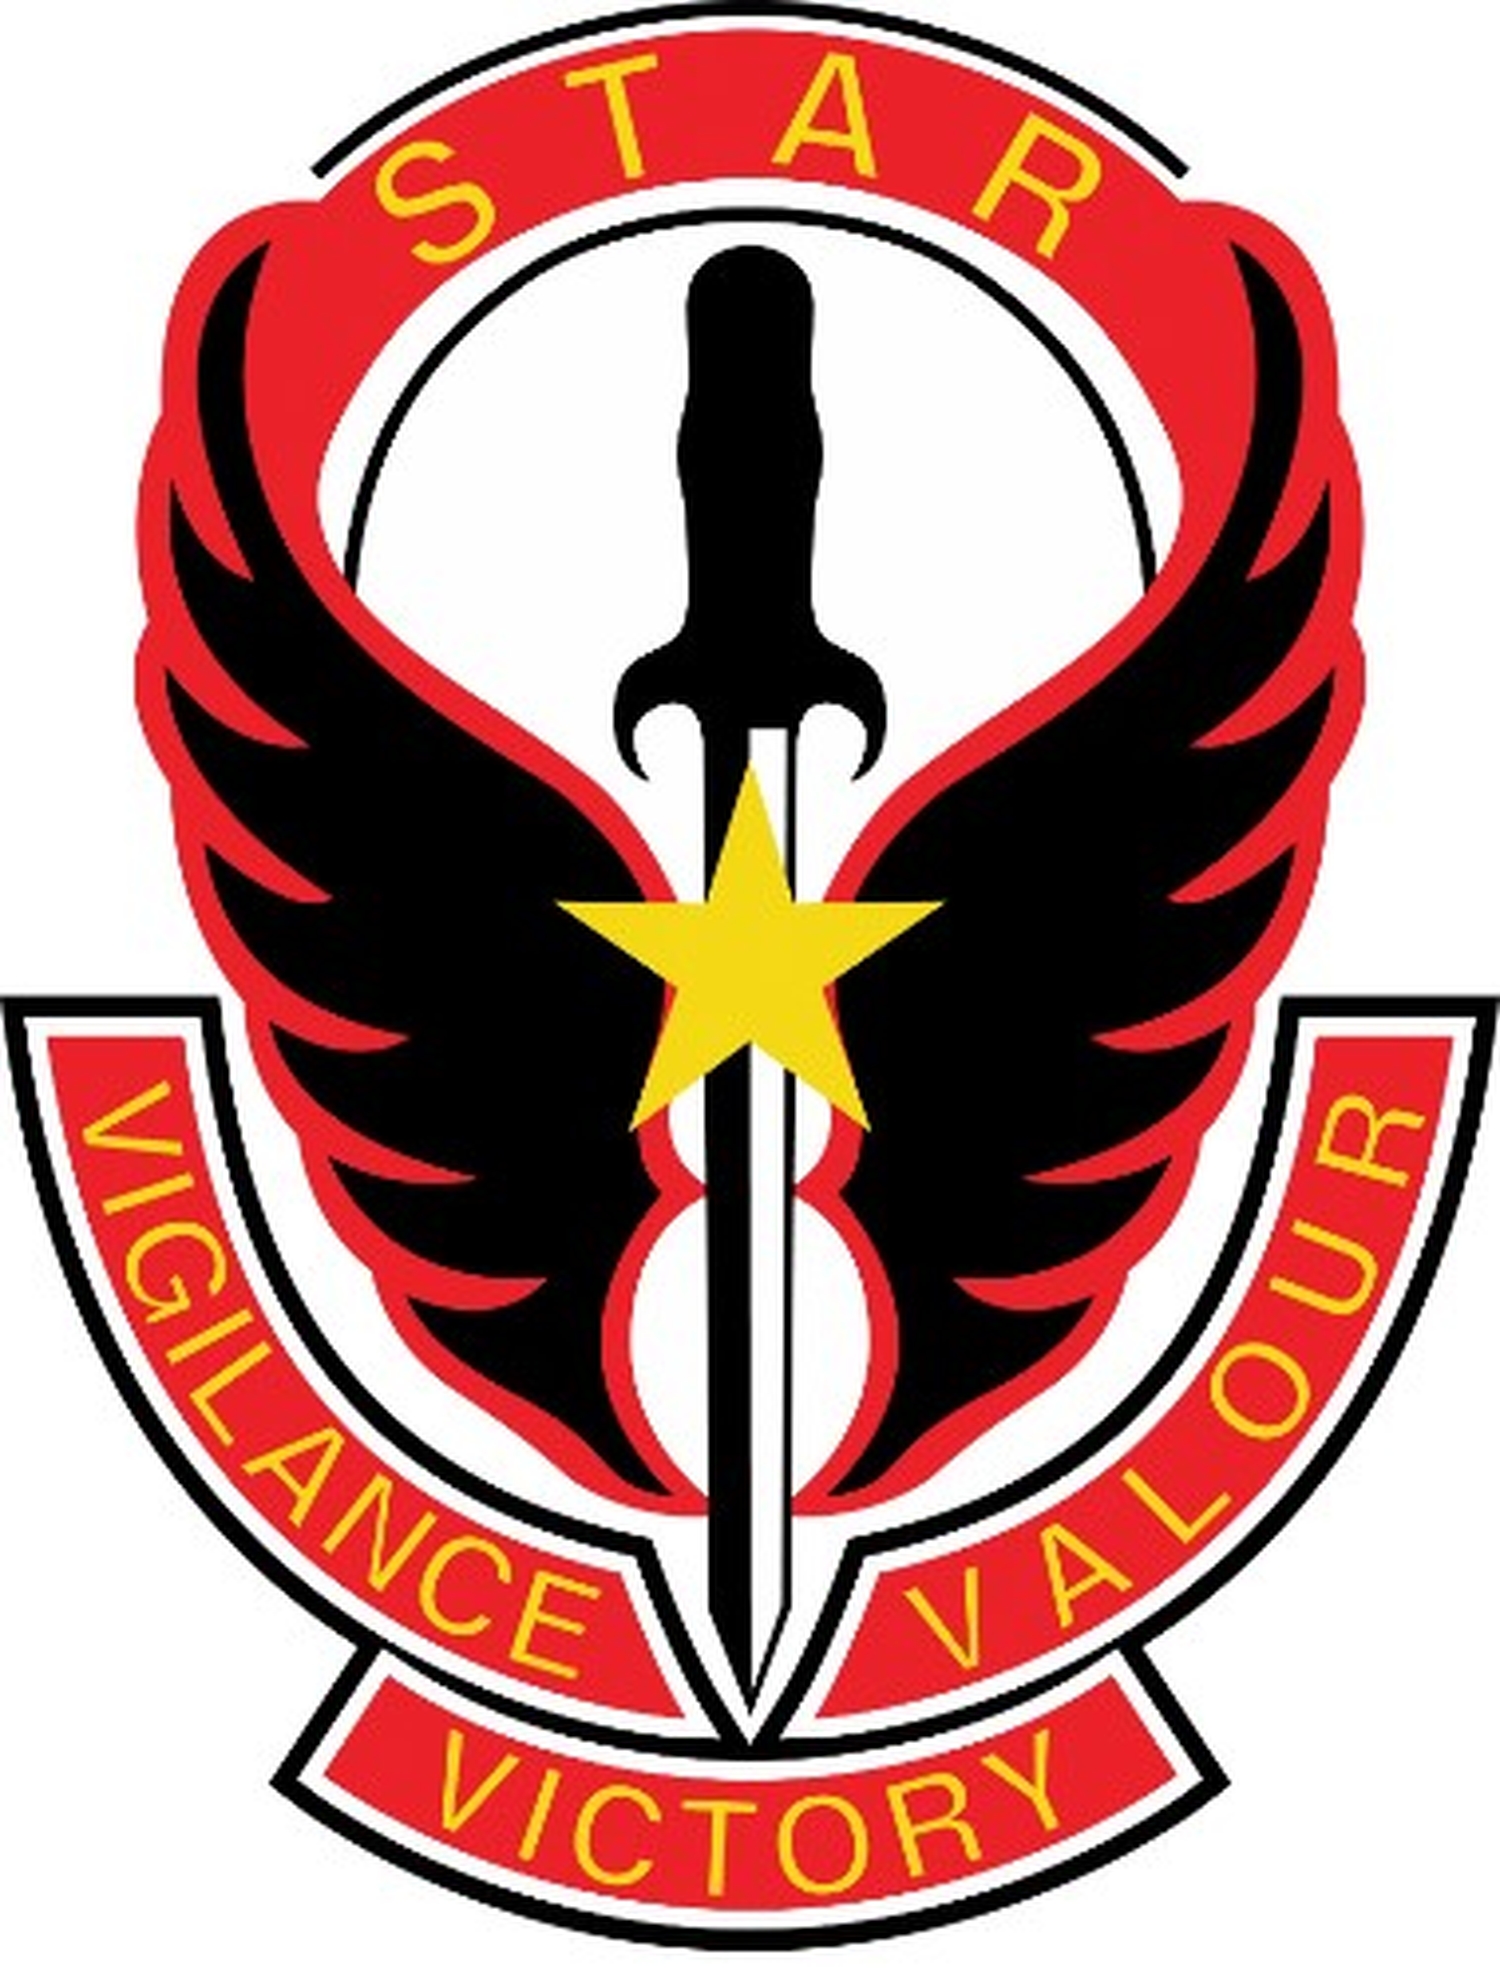 A logo with wings and a sword